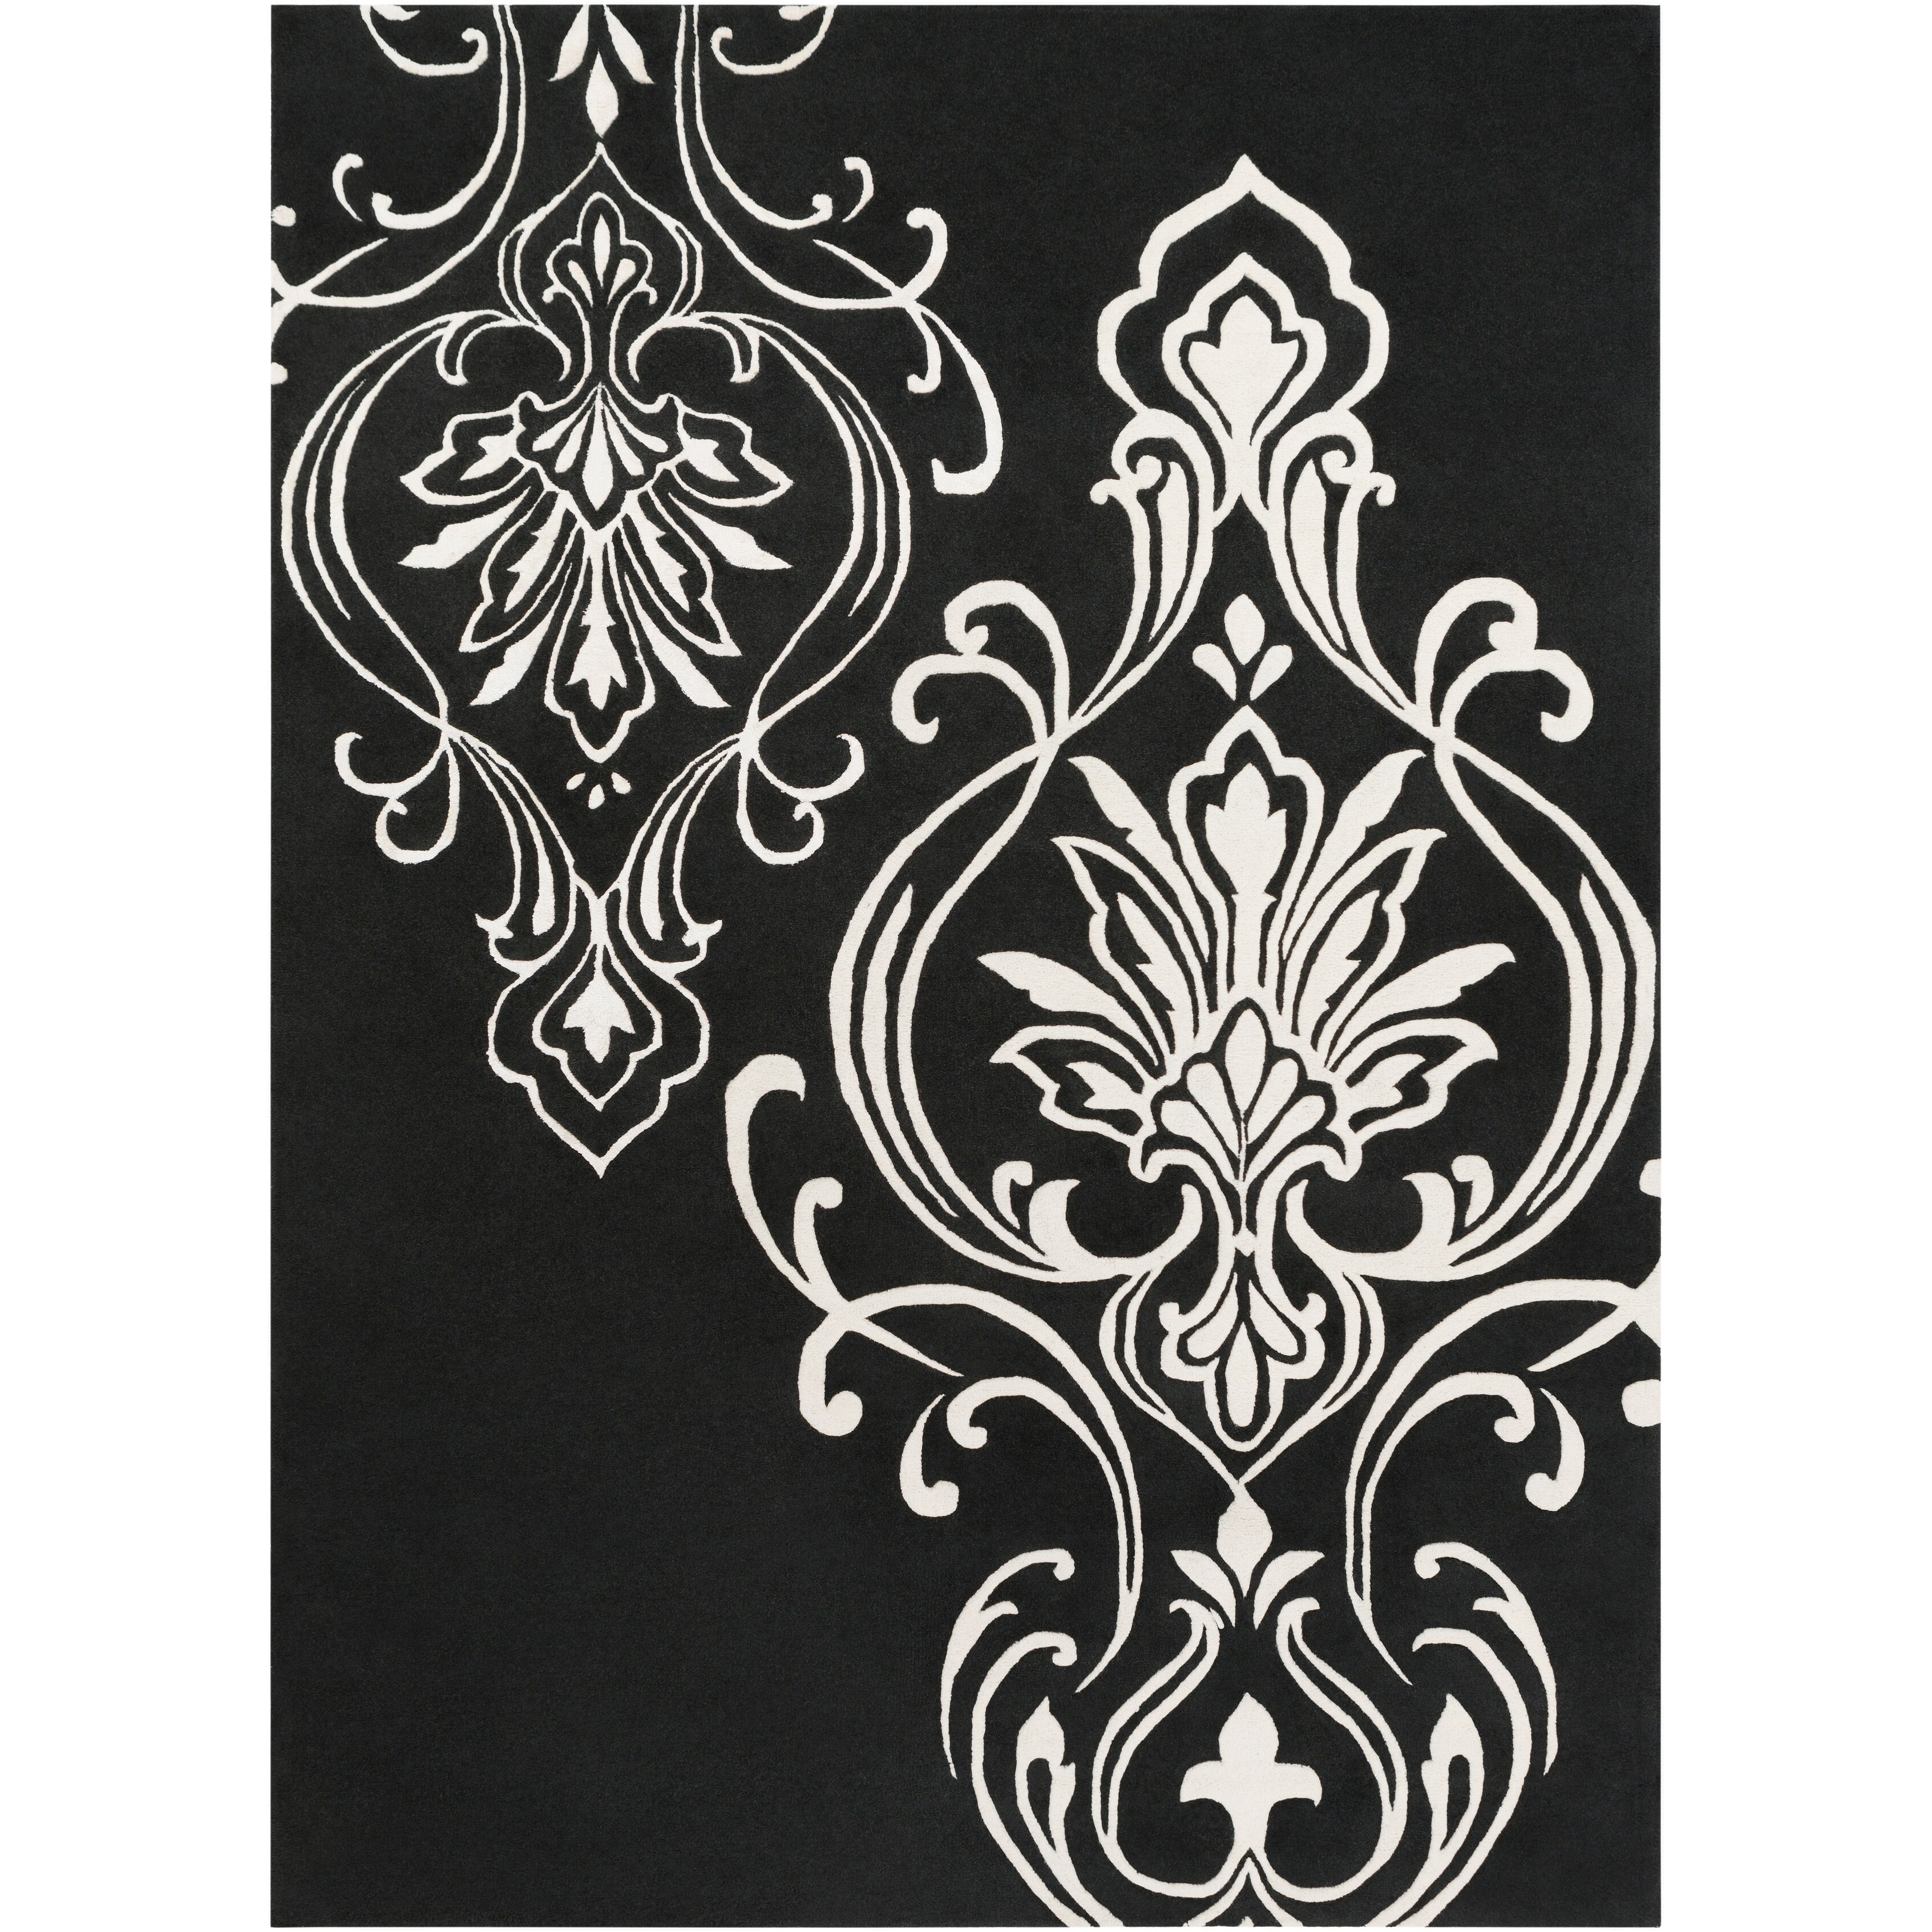 Hand-tufted Tux Damask Pattern Wool Area Rug - 8' x 11' - Bed Bath & Beyond  - 6344478